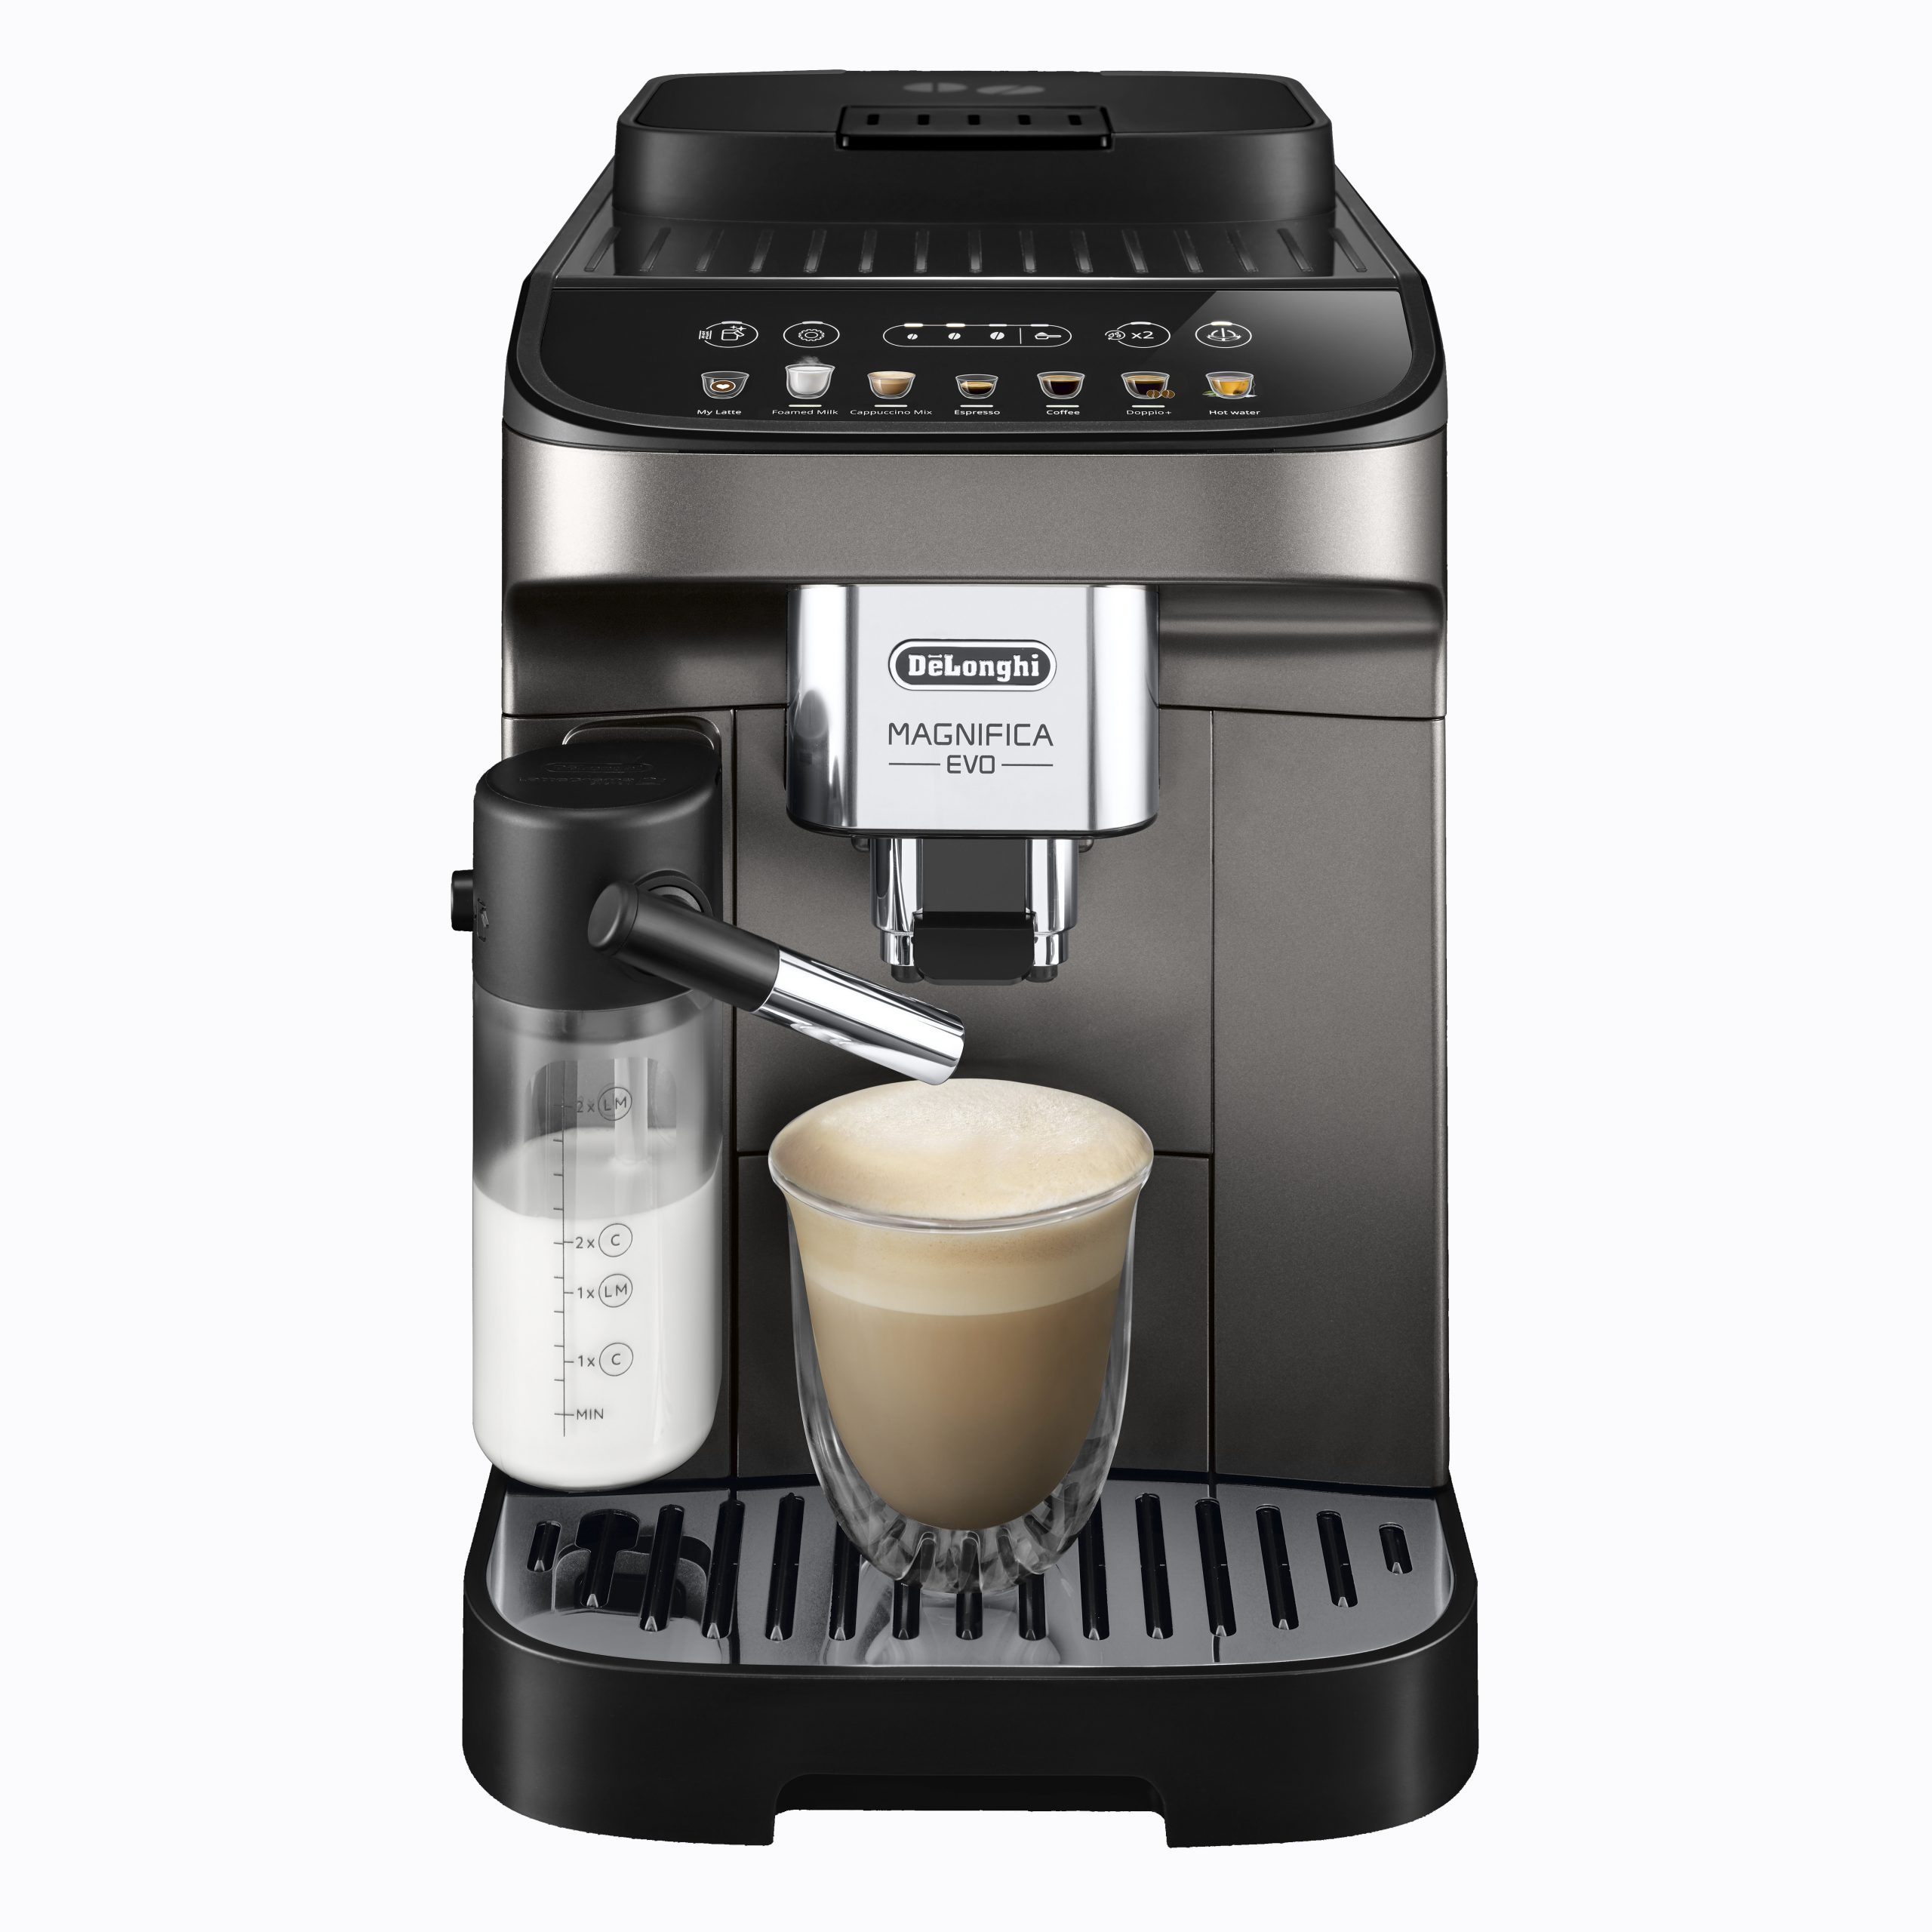 https://www.smarthouse.com.au/wp-content/uploads/2022/06/ECAM29083TB-Hero-Front-Cappuccino-Mix-scaled-1.jpg